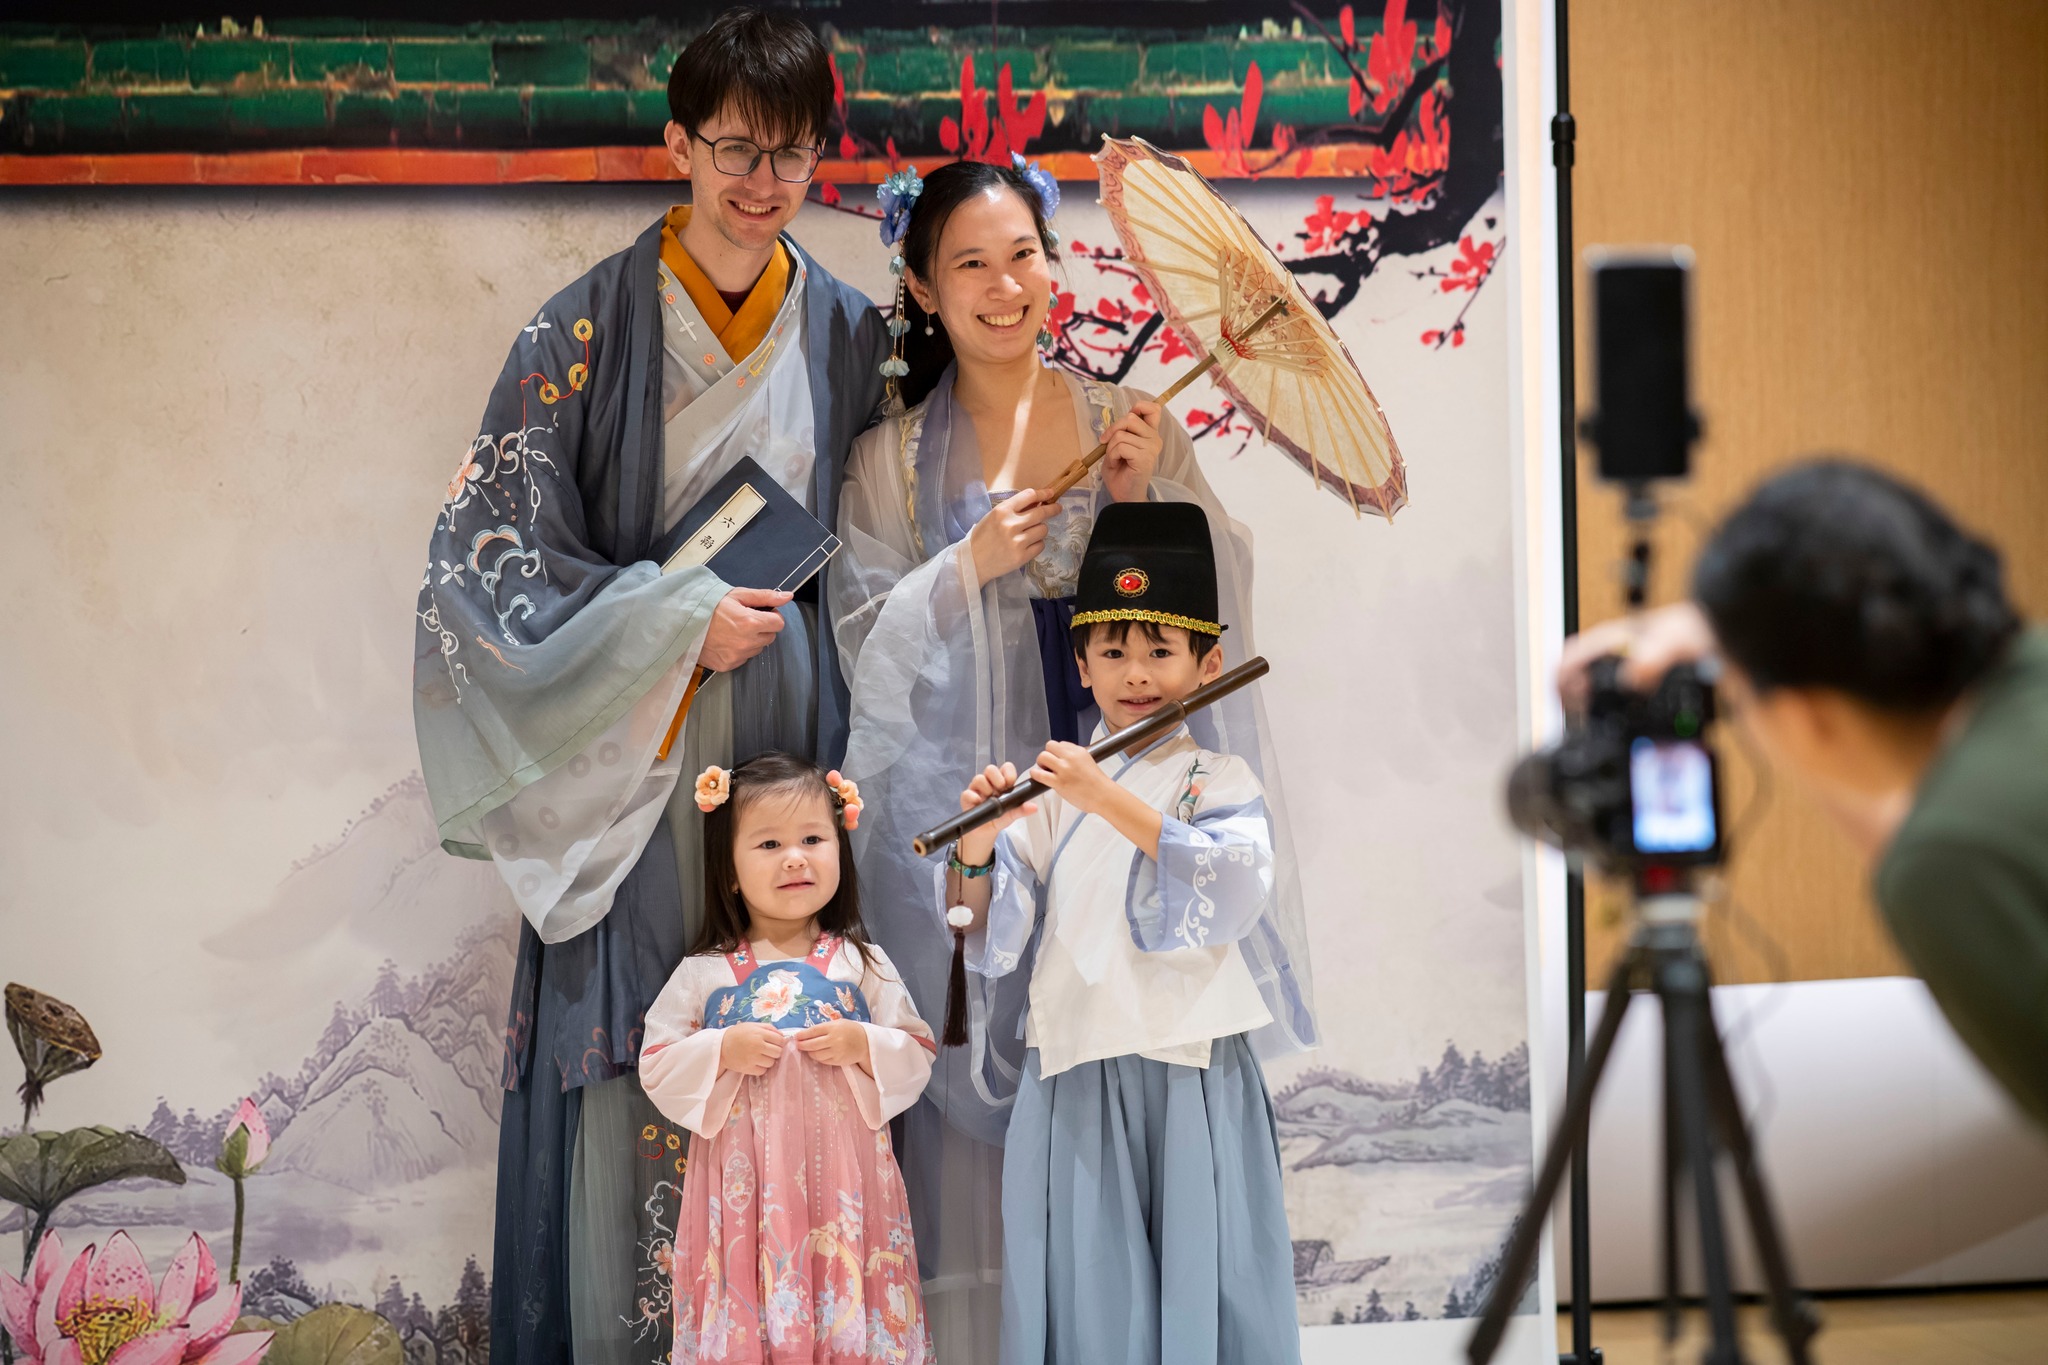 Wide shot of a family of four getting photographed while dressed in hanfu